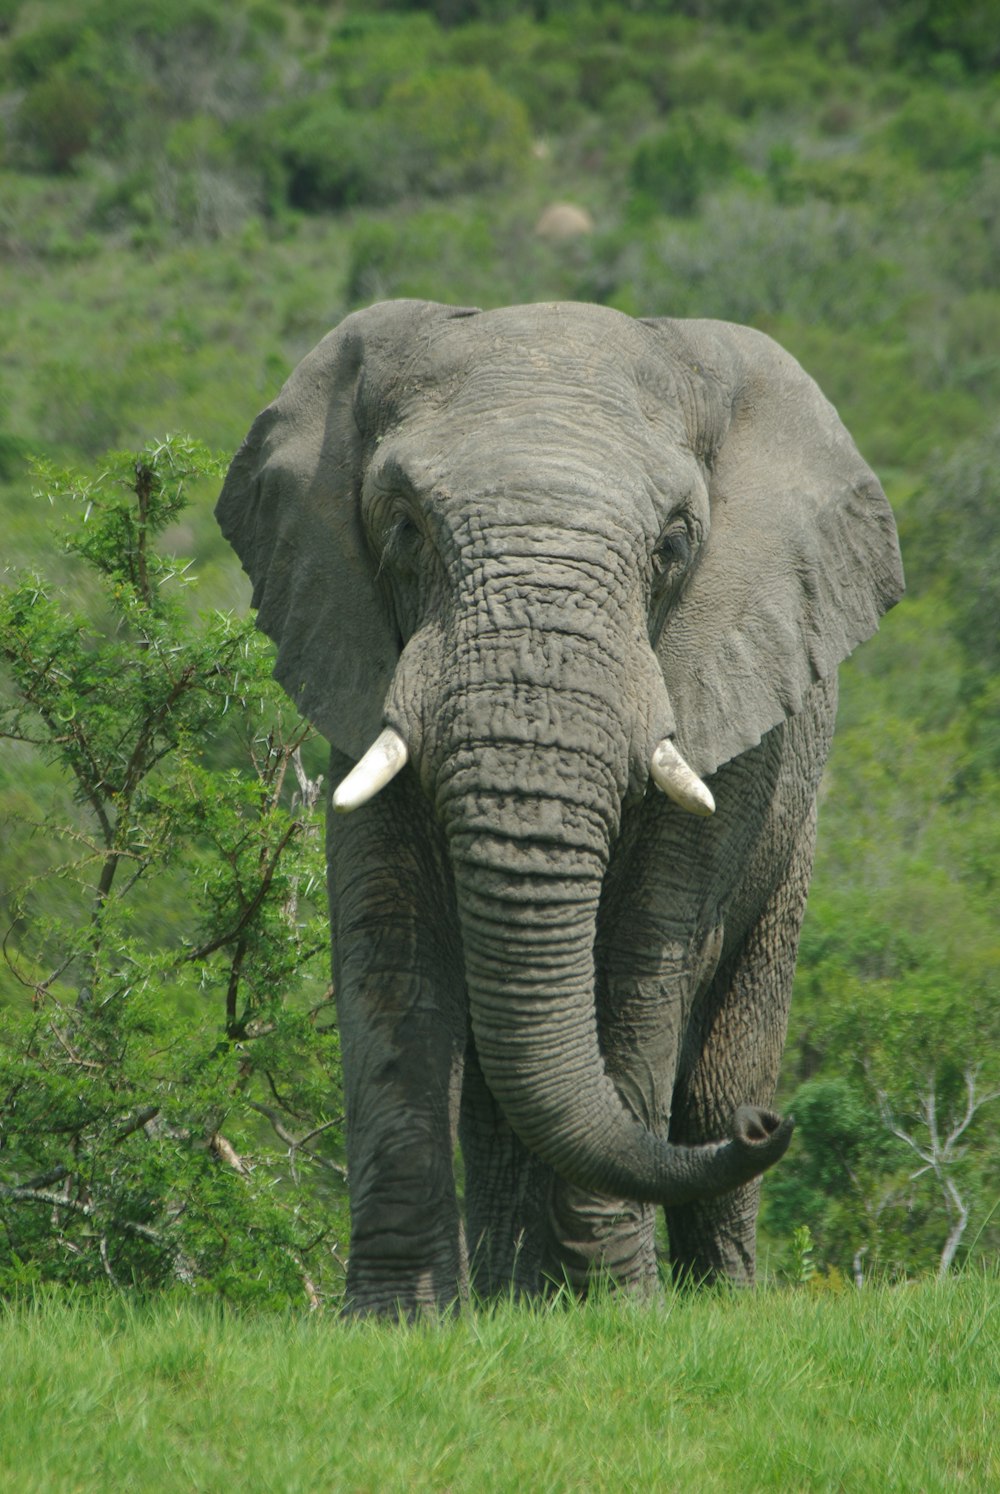 elephant standing on green grass field during daytime